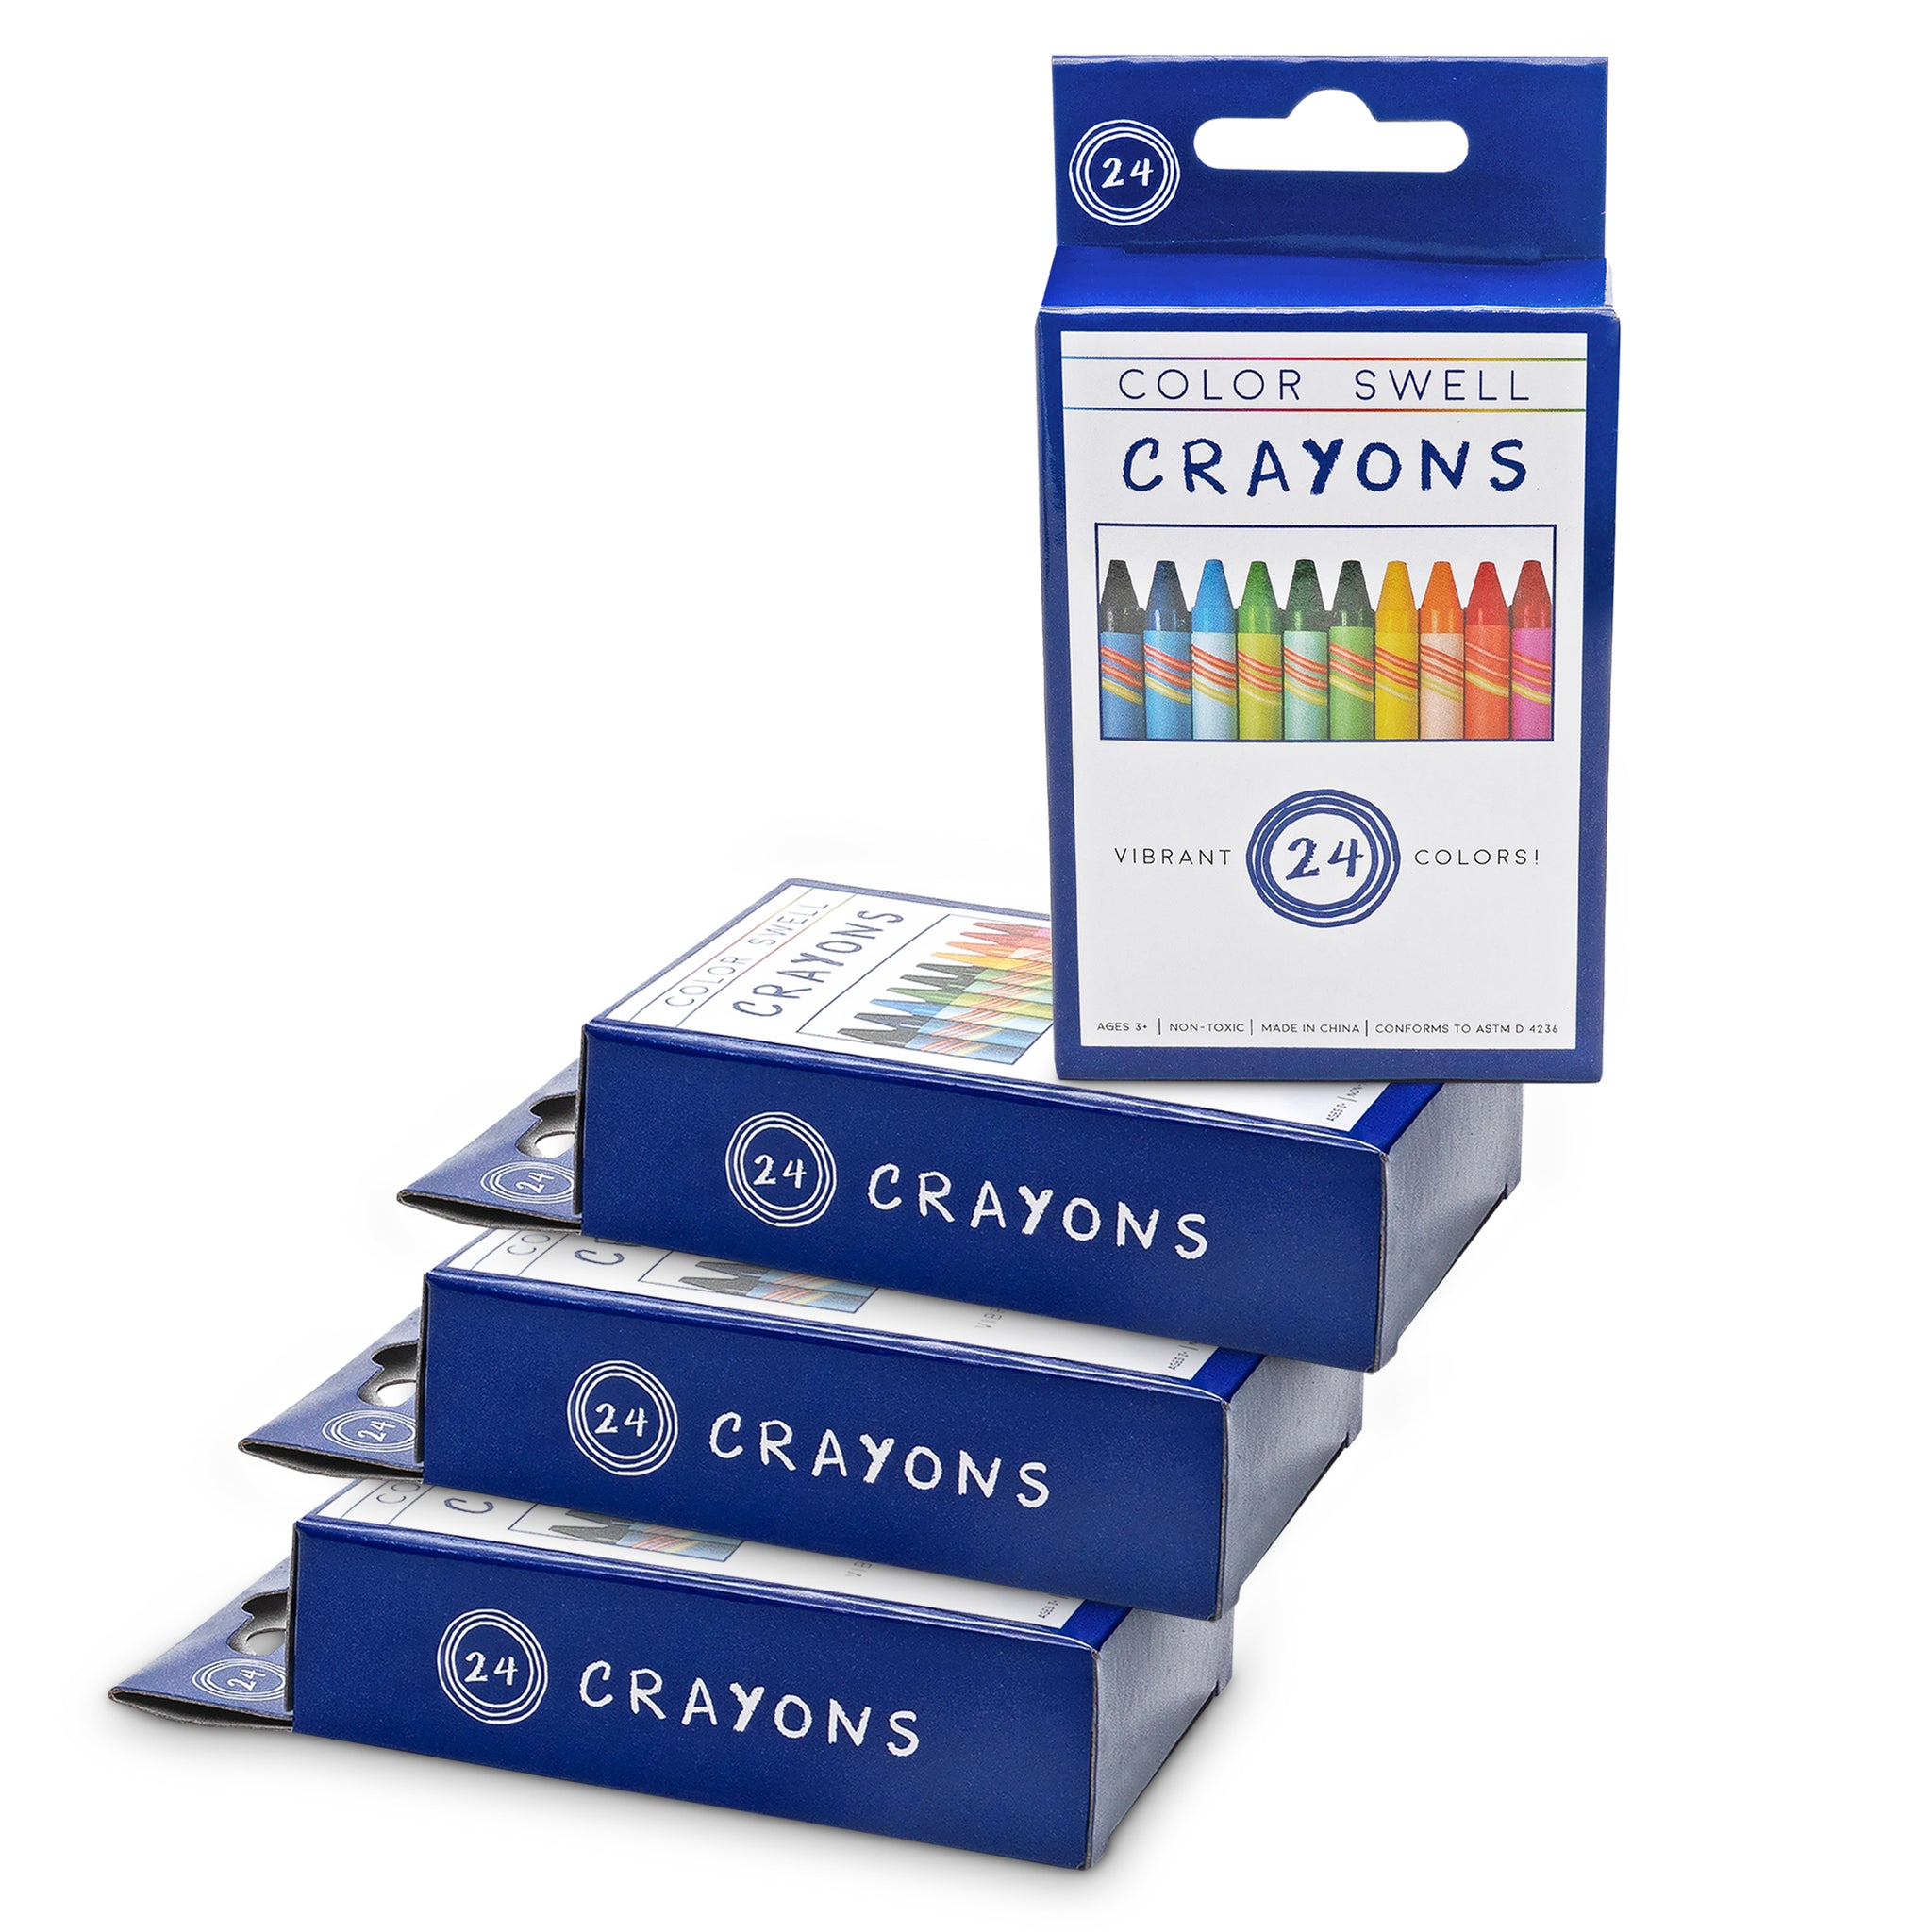 Color Swell Bulk Crayon Packs - 36 Boxes of 24 Vibrant Colored Crayons